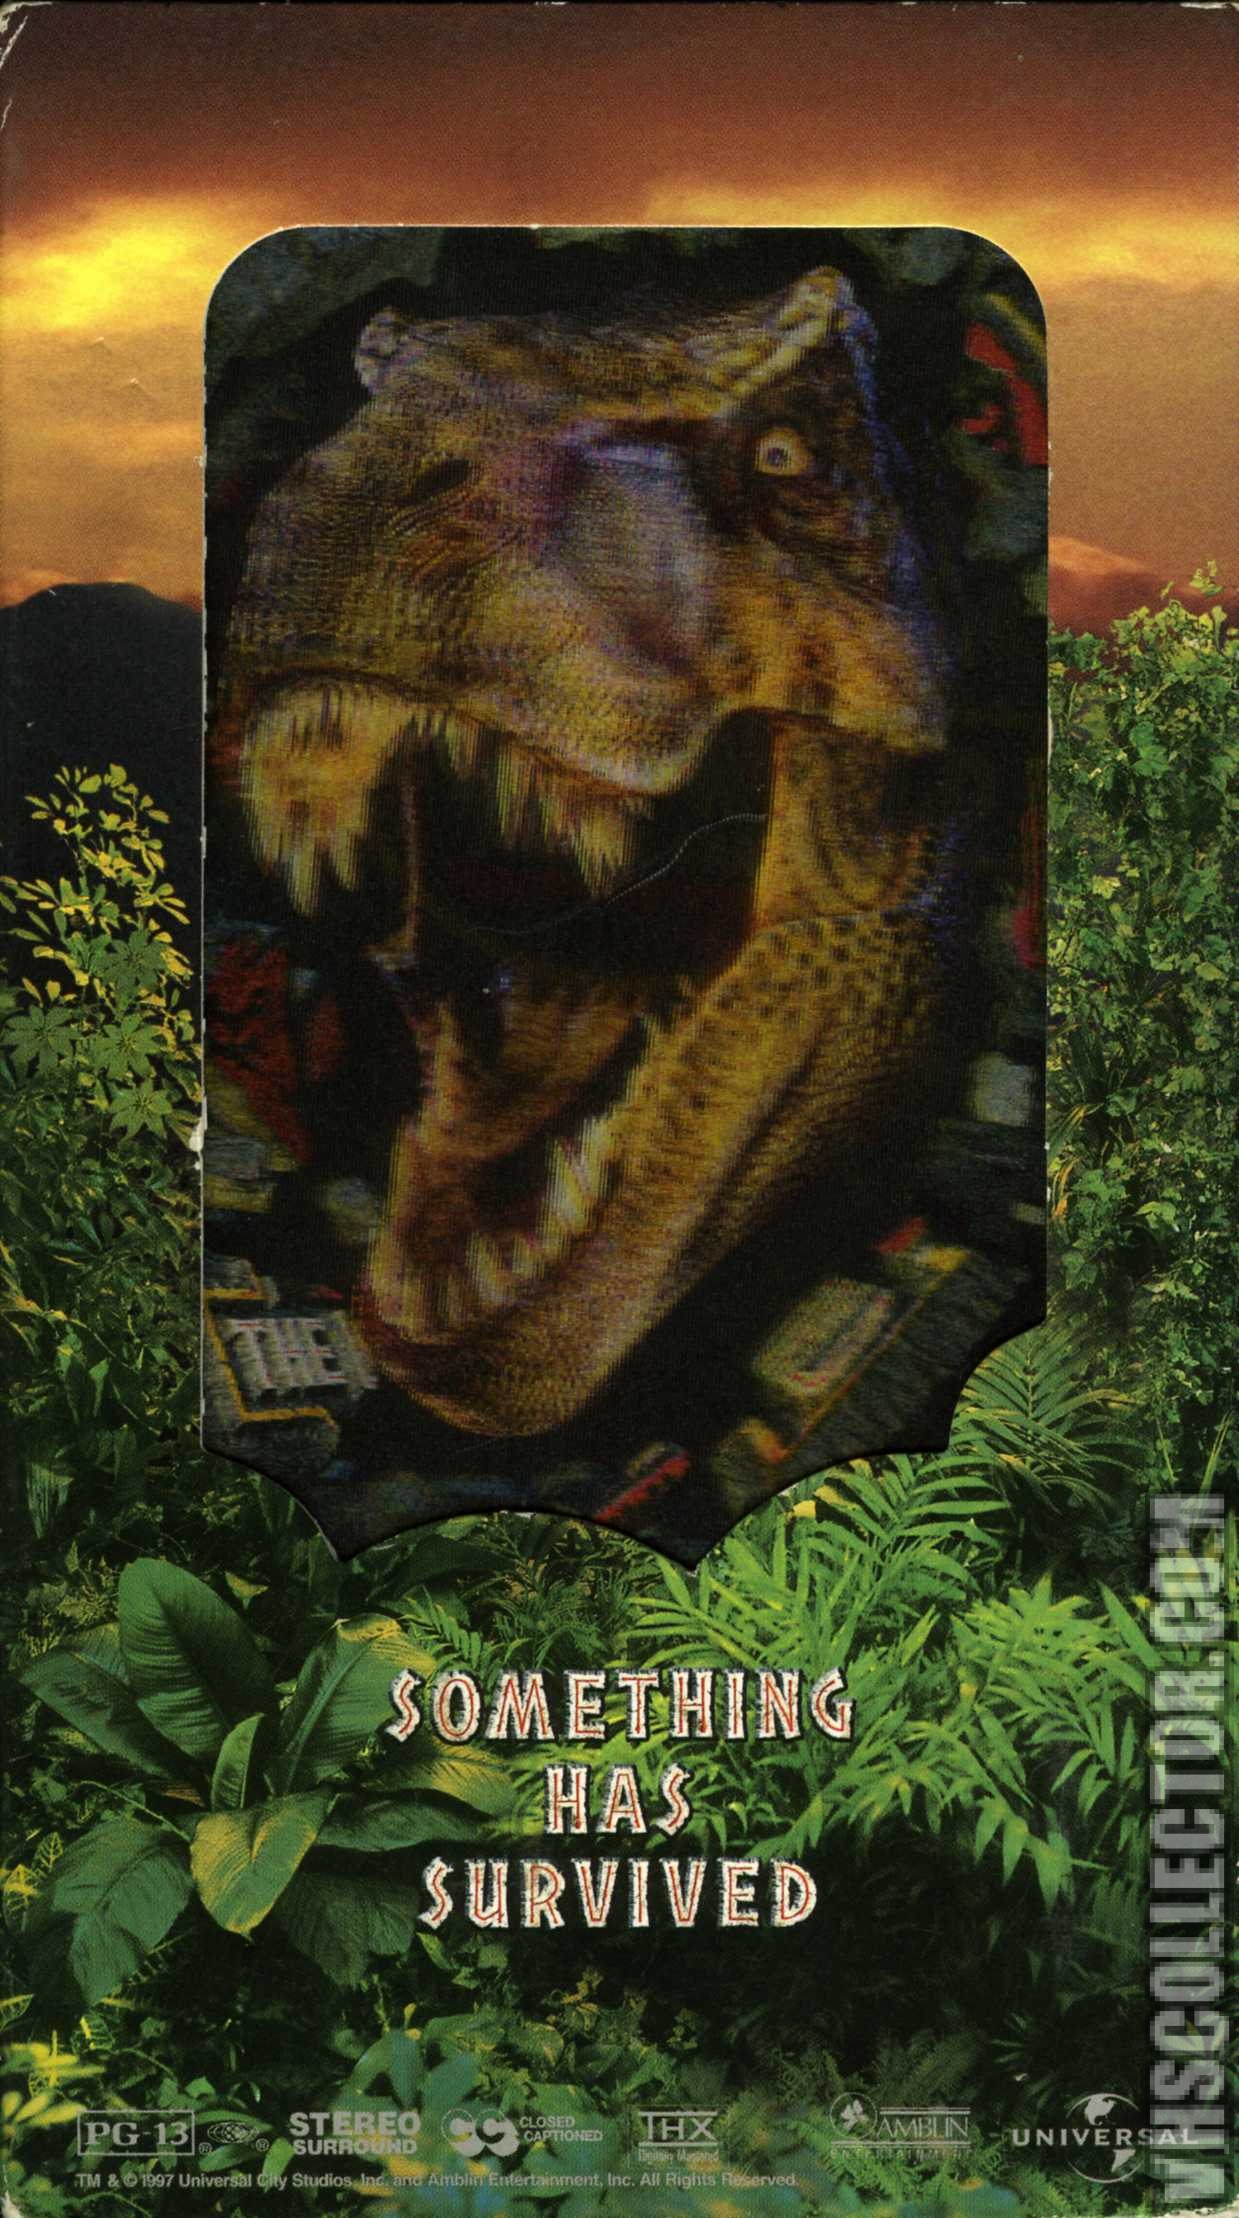 The Lost World: Jurassic Park | VHSCollector.com